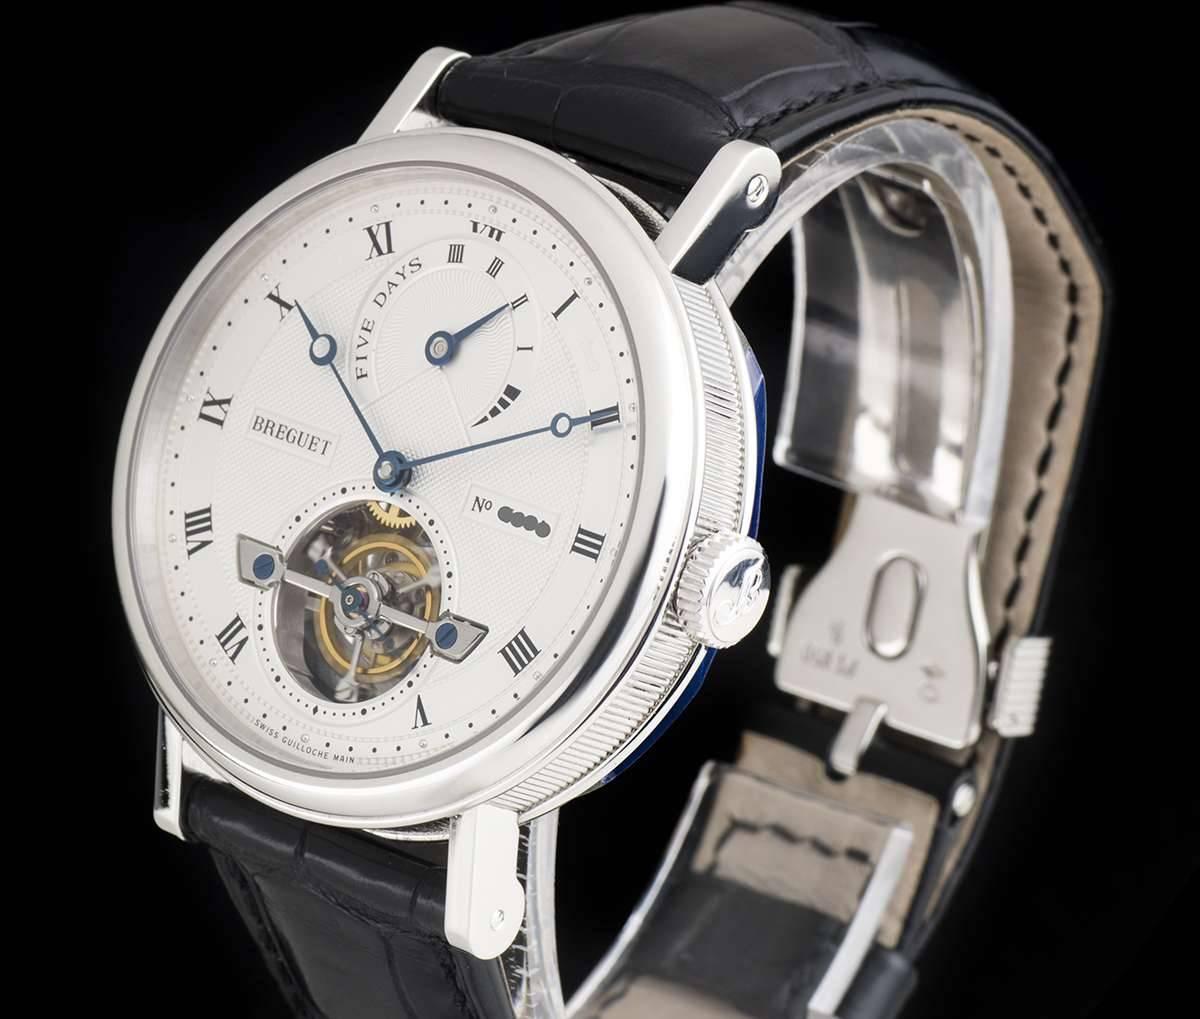 A Platinum Tourbillon Power Reserve Gents Wristwatch, silvered gold dial hand engraved on a rose engine, silver outer chapter ring with roman numerals, small seconds on tourbillon display at 6 0'clock, power reserve display at 12 0'clock, a fixed